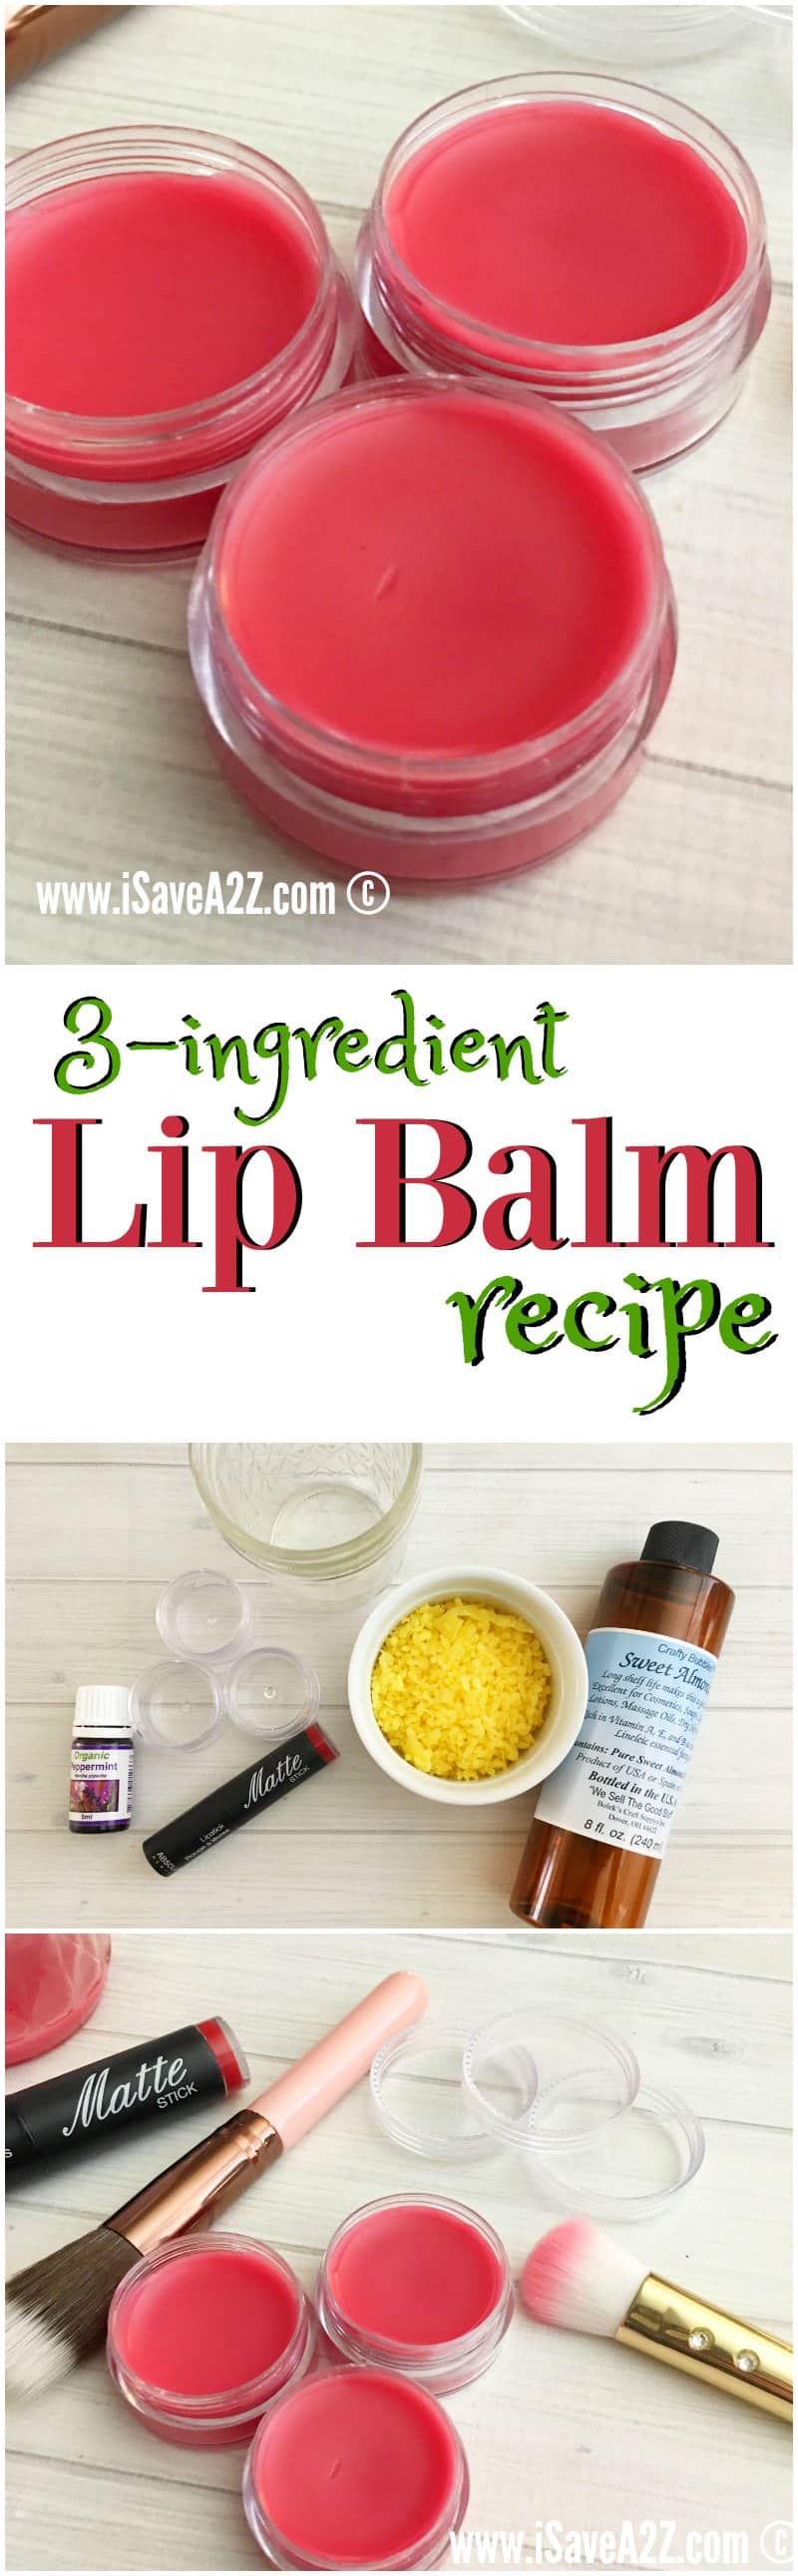 3 Ingredient Lip Balm Recipe that makes the PERFECT homemade gift idea!